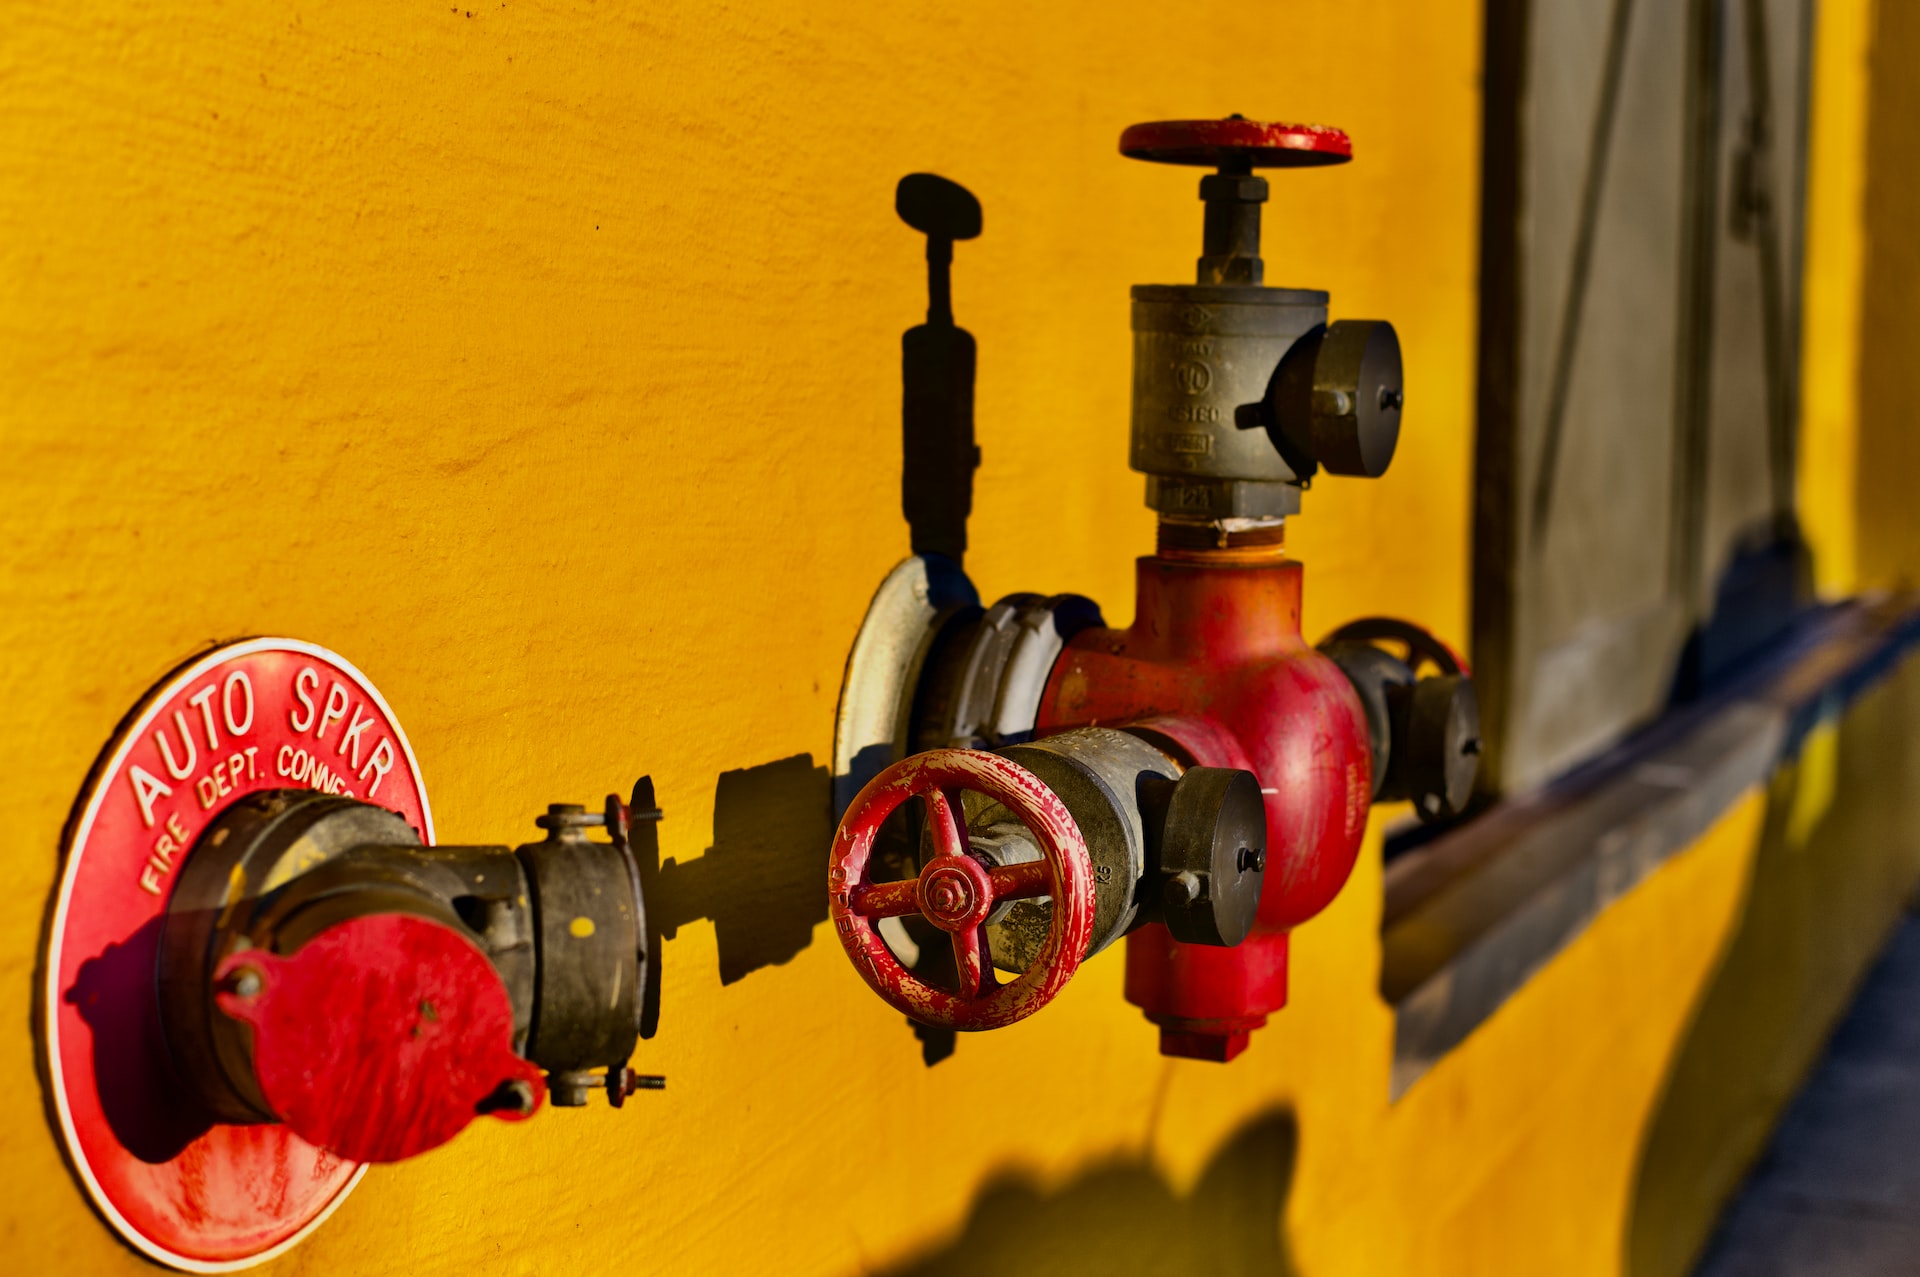 Troubleshooting Fire Sprinkler Issues